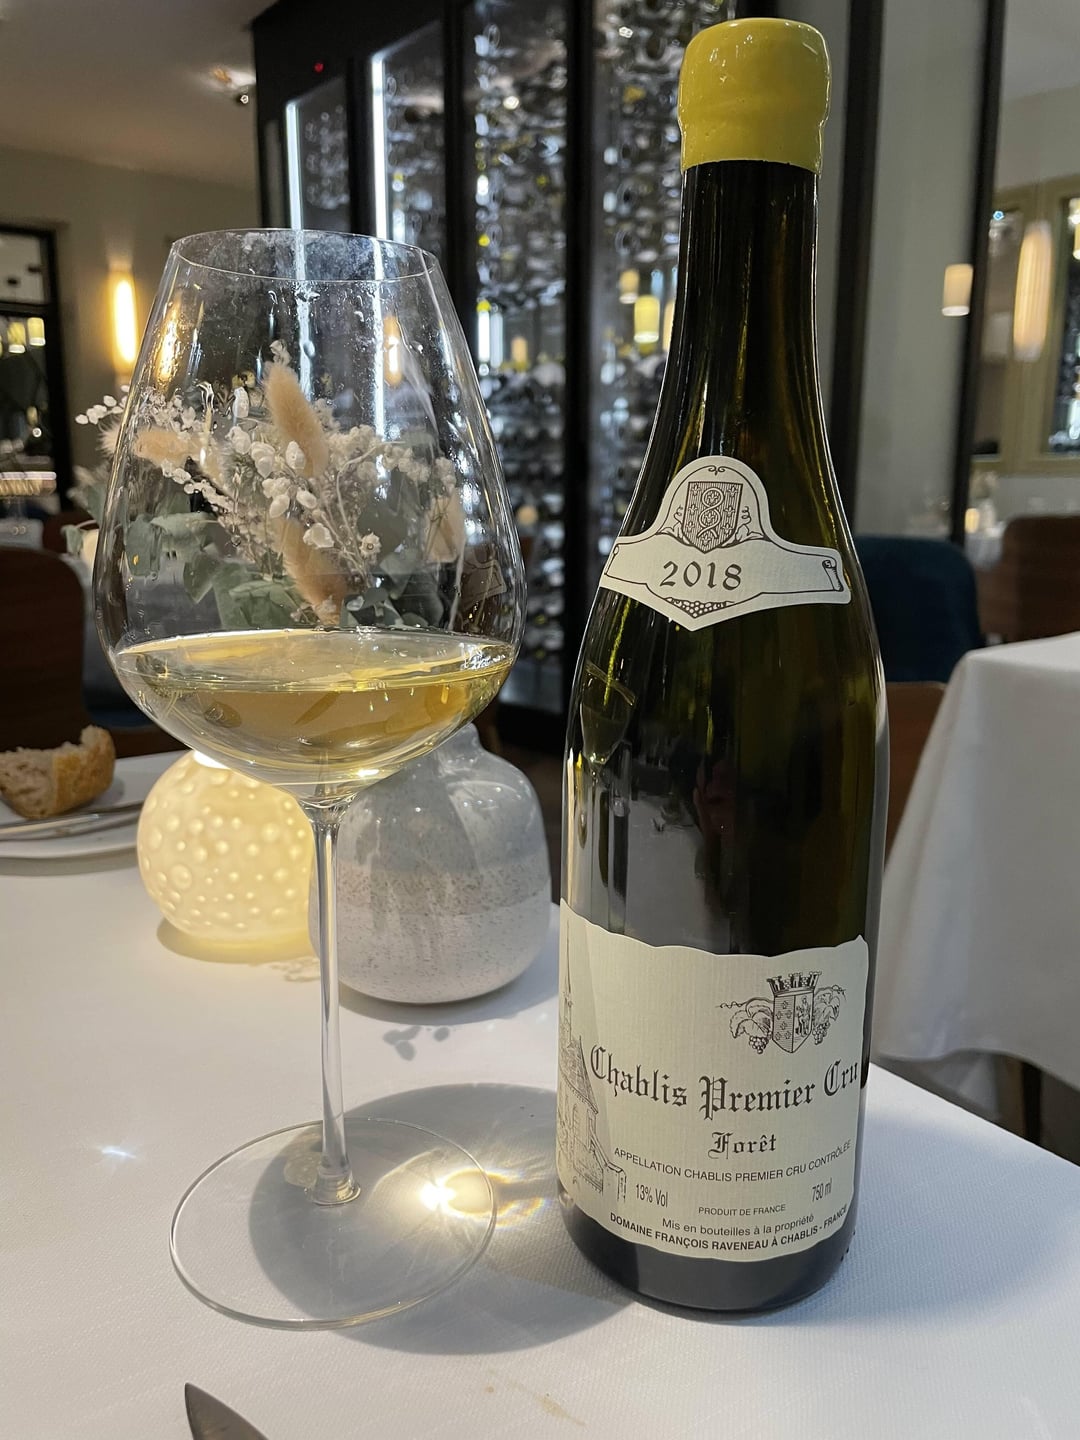 Discovering burgundy wines (and a few others) - Dining and Cooking